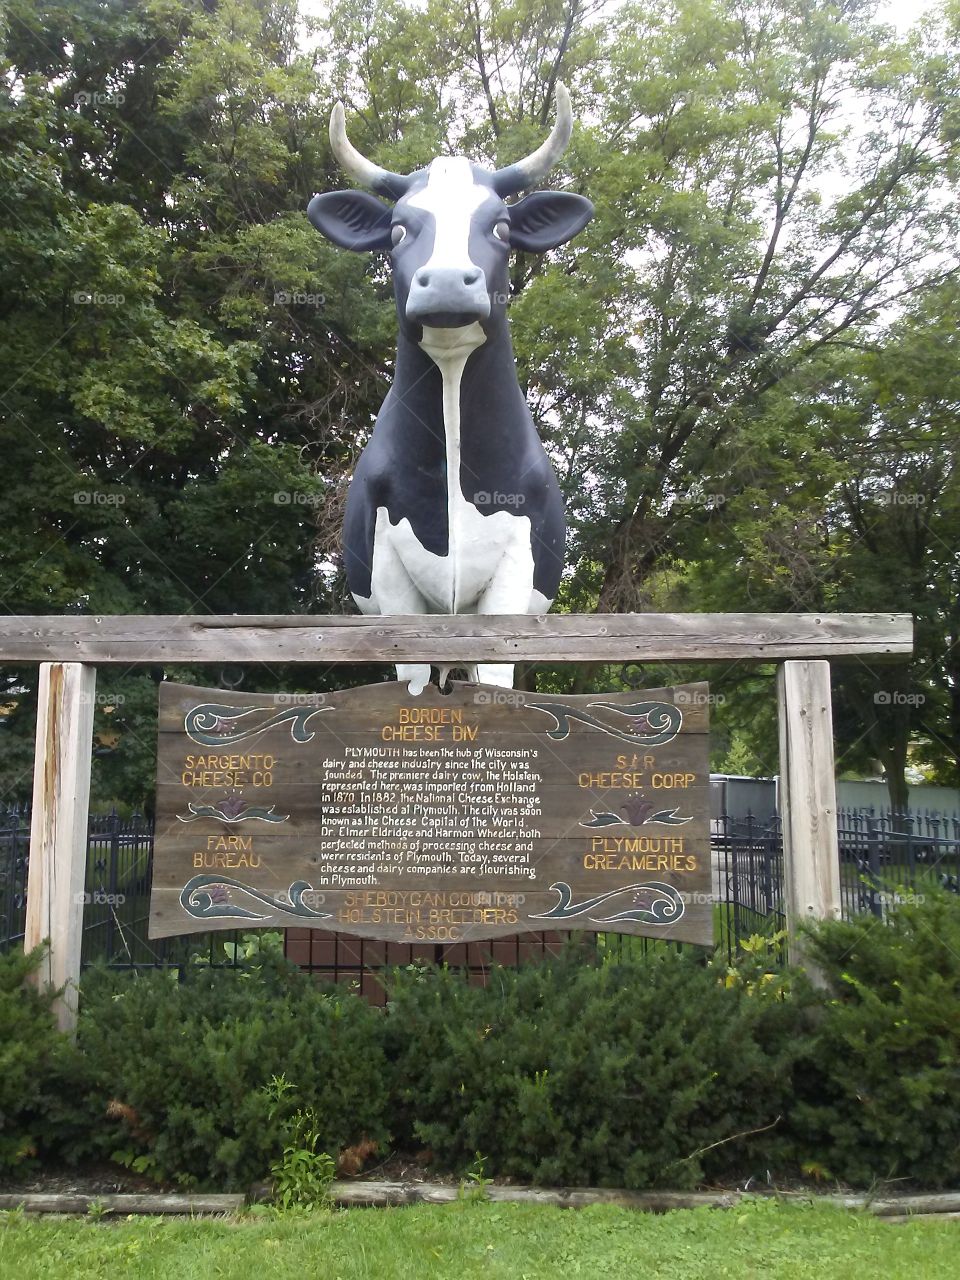 Antoinette.....Plymouth statue paying tribute to the dairy industry especially cheese.